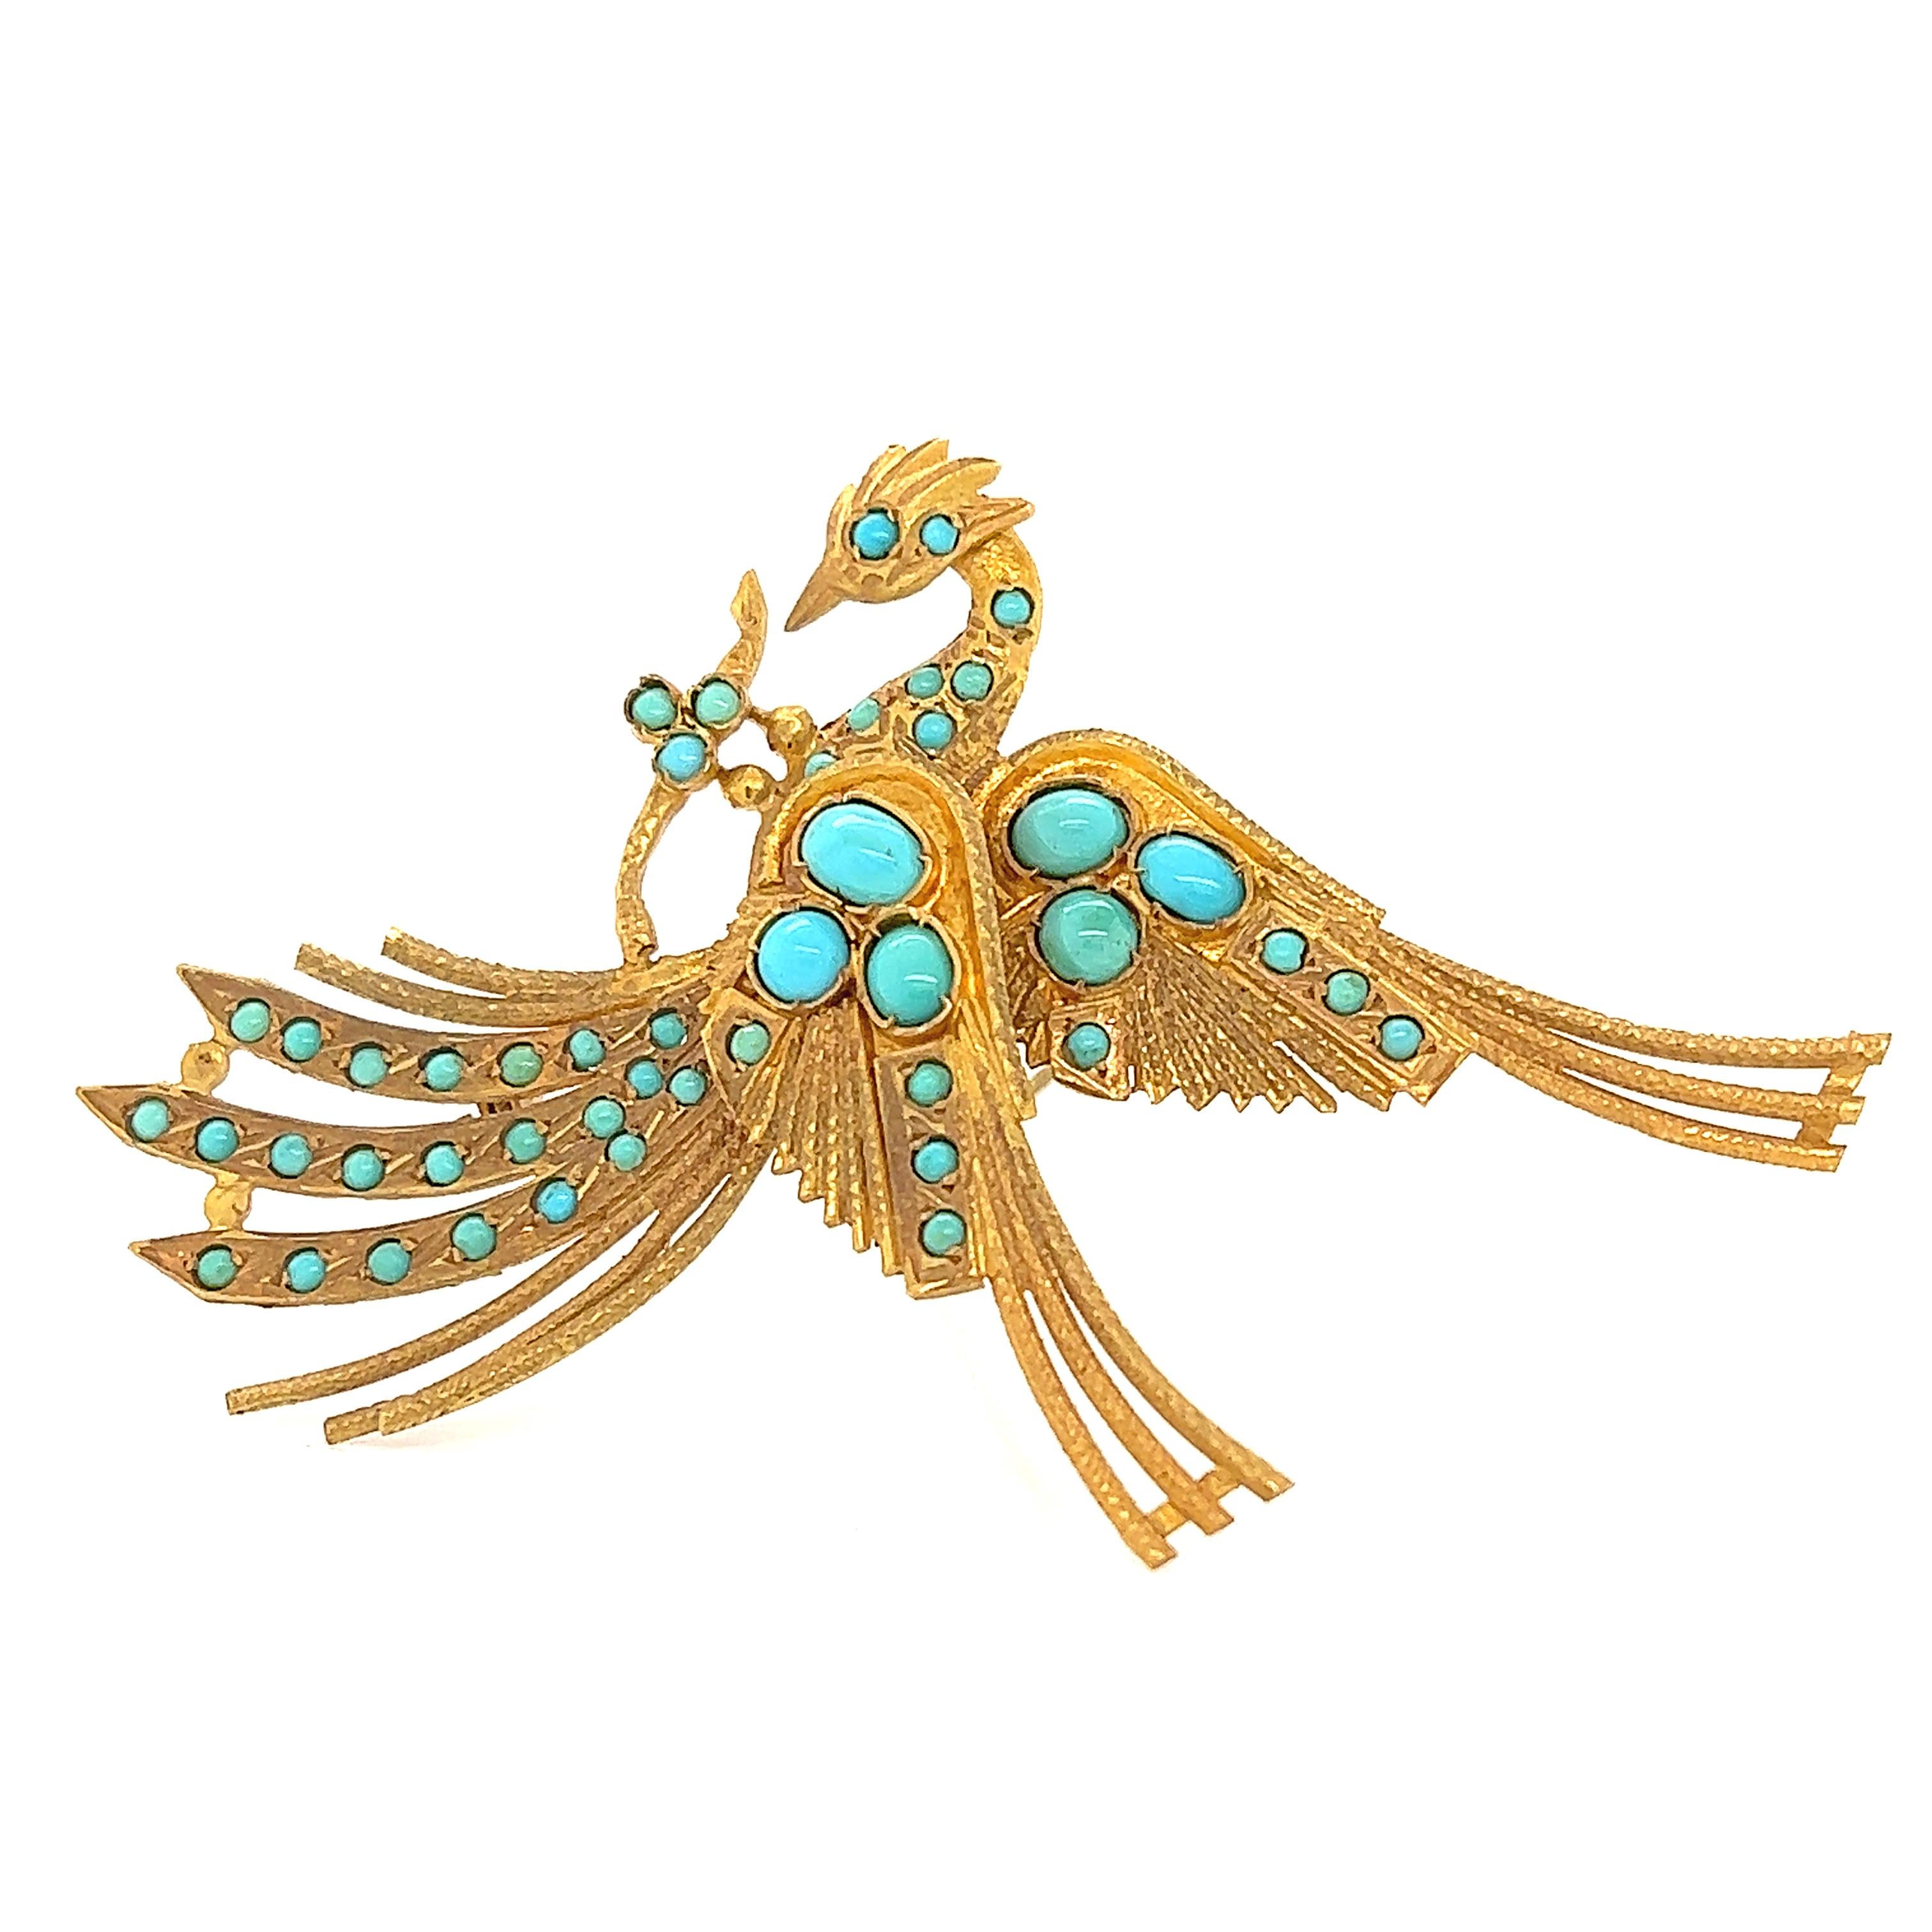 Beautiful design seen on this hand made Egyptian revival brooch. The brooch is crafted in 18k yellow gold and in the theme of a Phoenix, a mythical bird. The gold workings on the brooch is truly phenomenal, techniques that were rarely seen and far